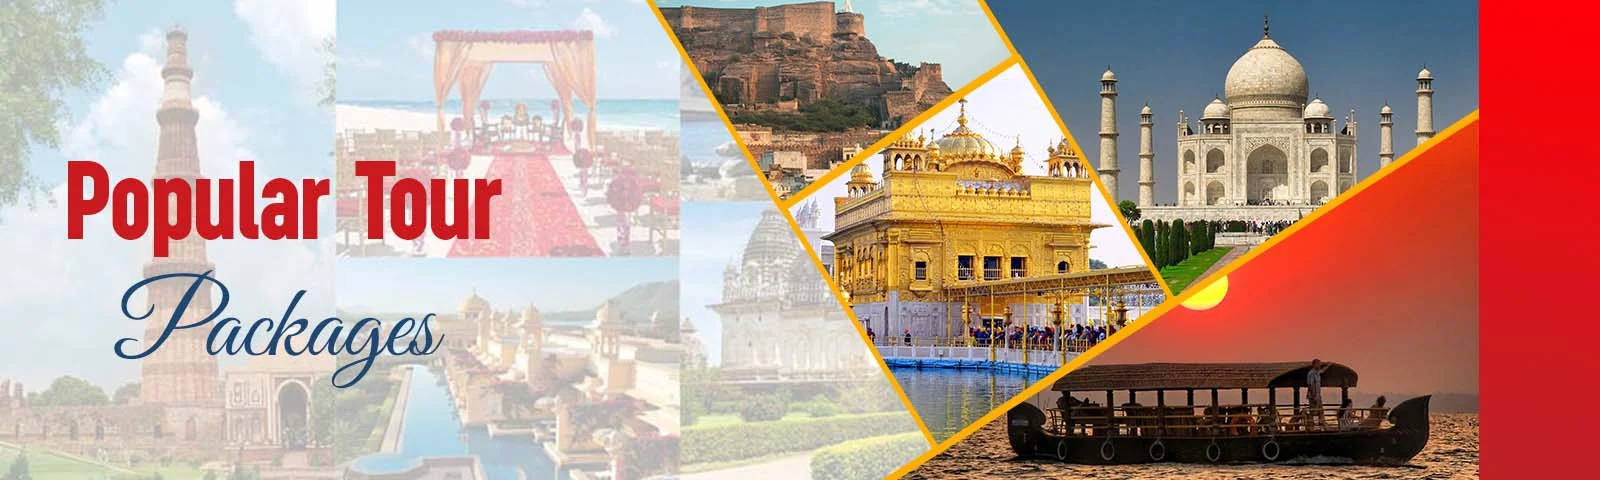 Popular Tour packages in India